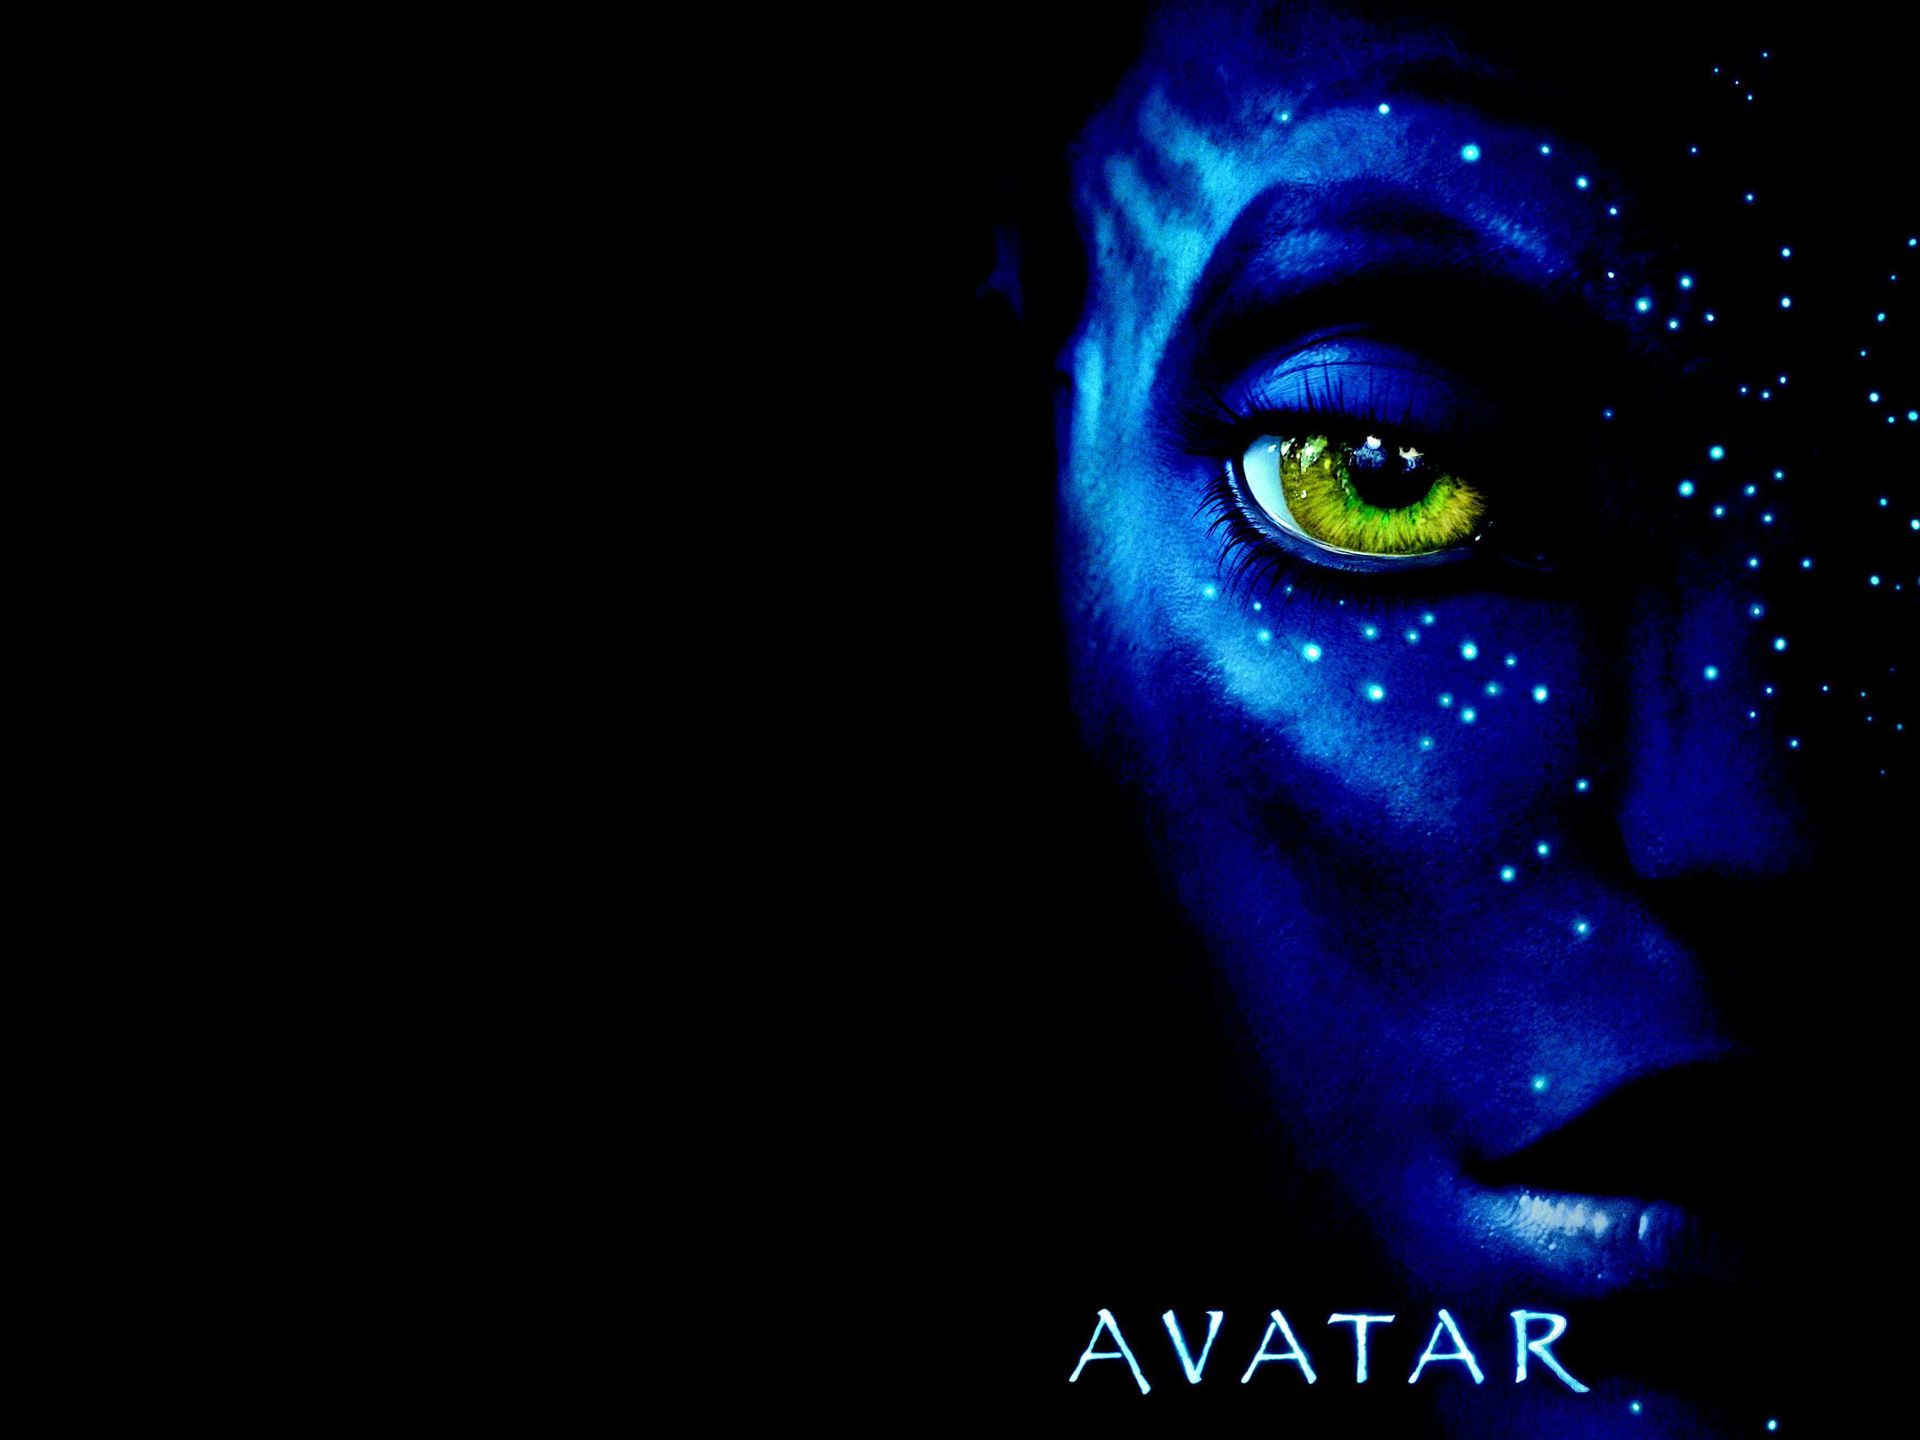 Avatar 4K wallpaper for your desktop or mobile screen free and easy to download